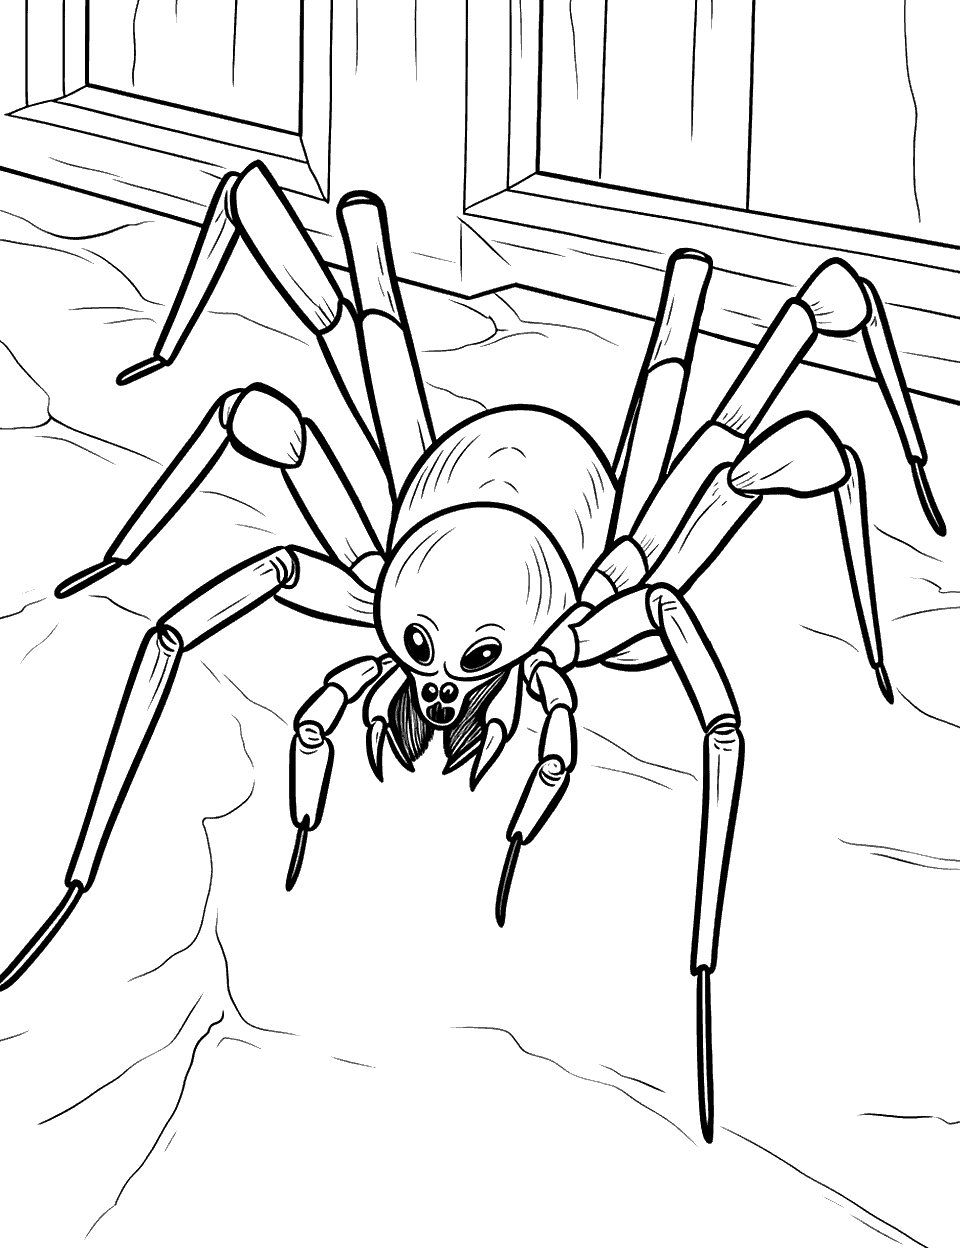 Brown Recluse in a Corner Spider Coloring Page - A brown recluse spider tucked away in a small, uncluttered corner.